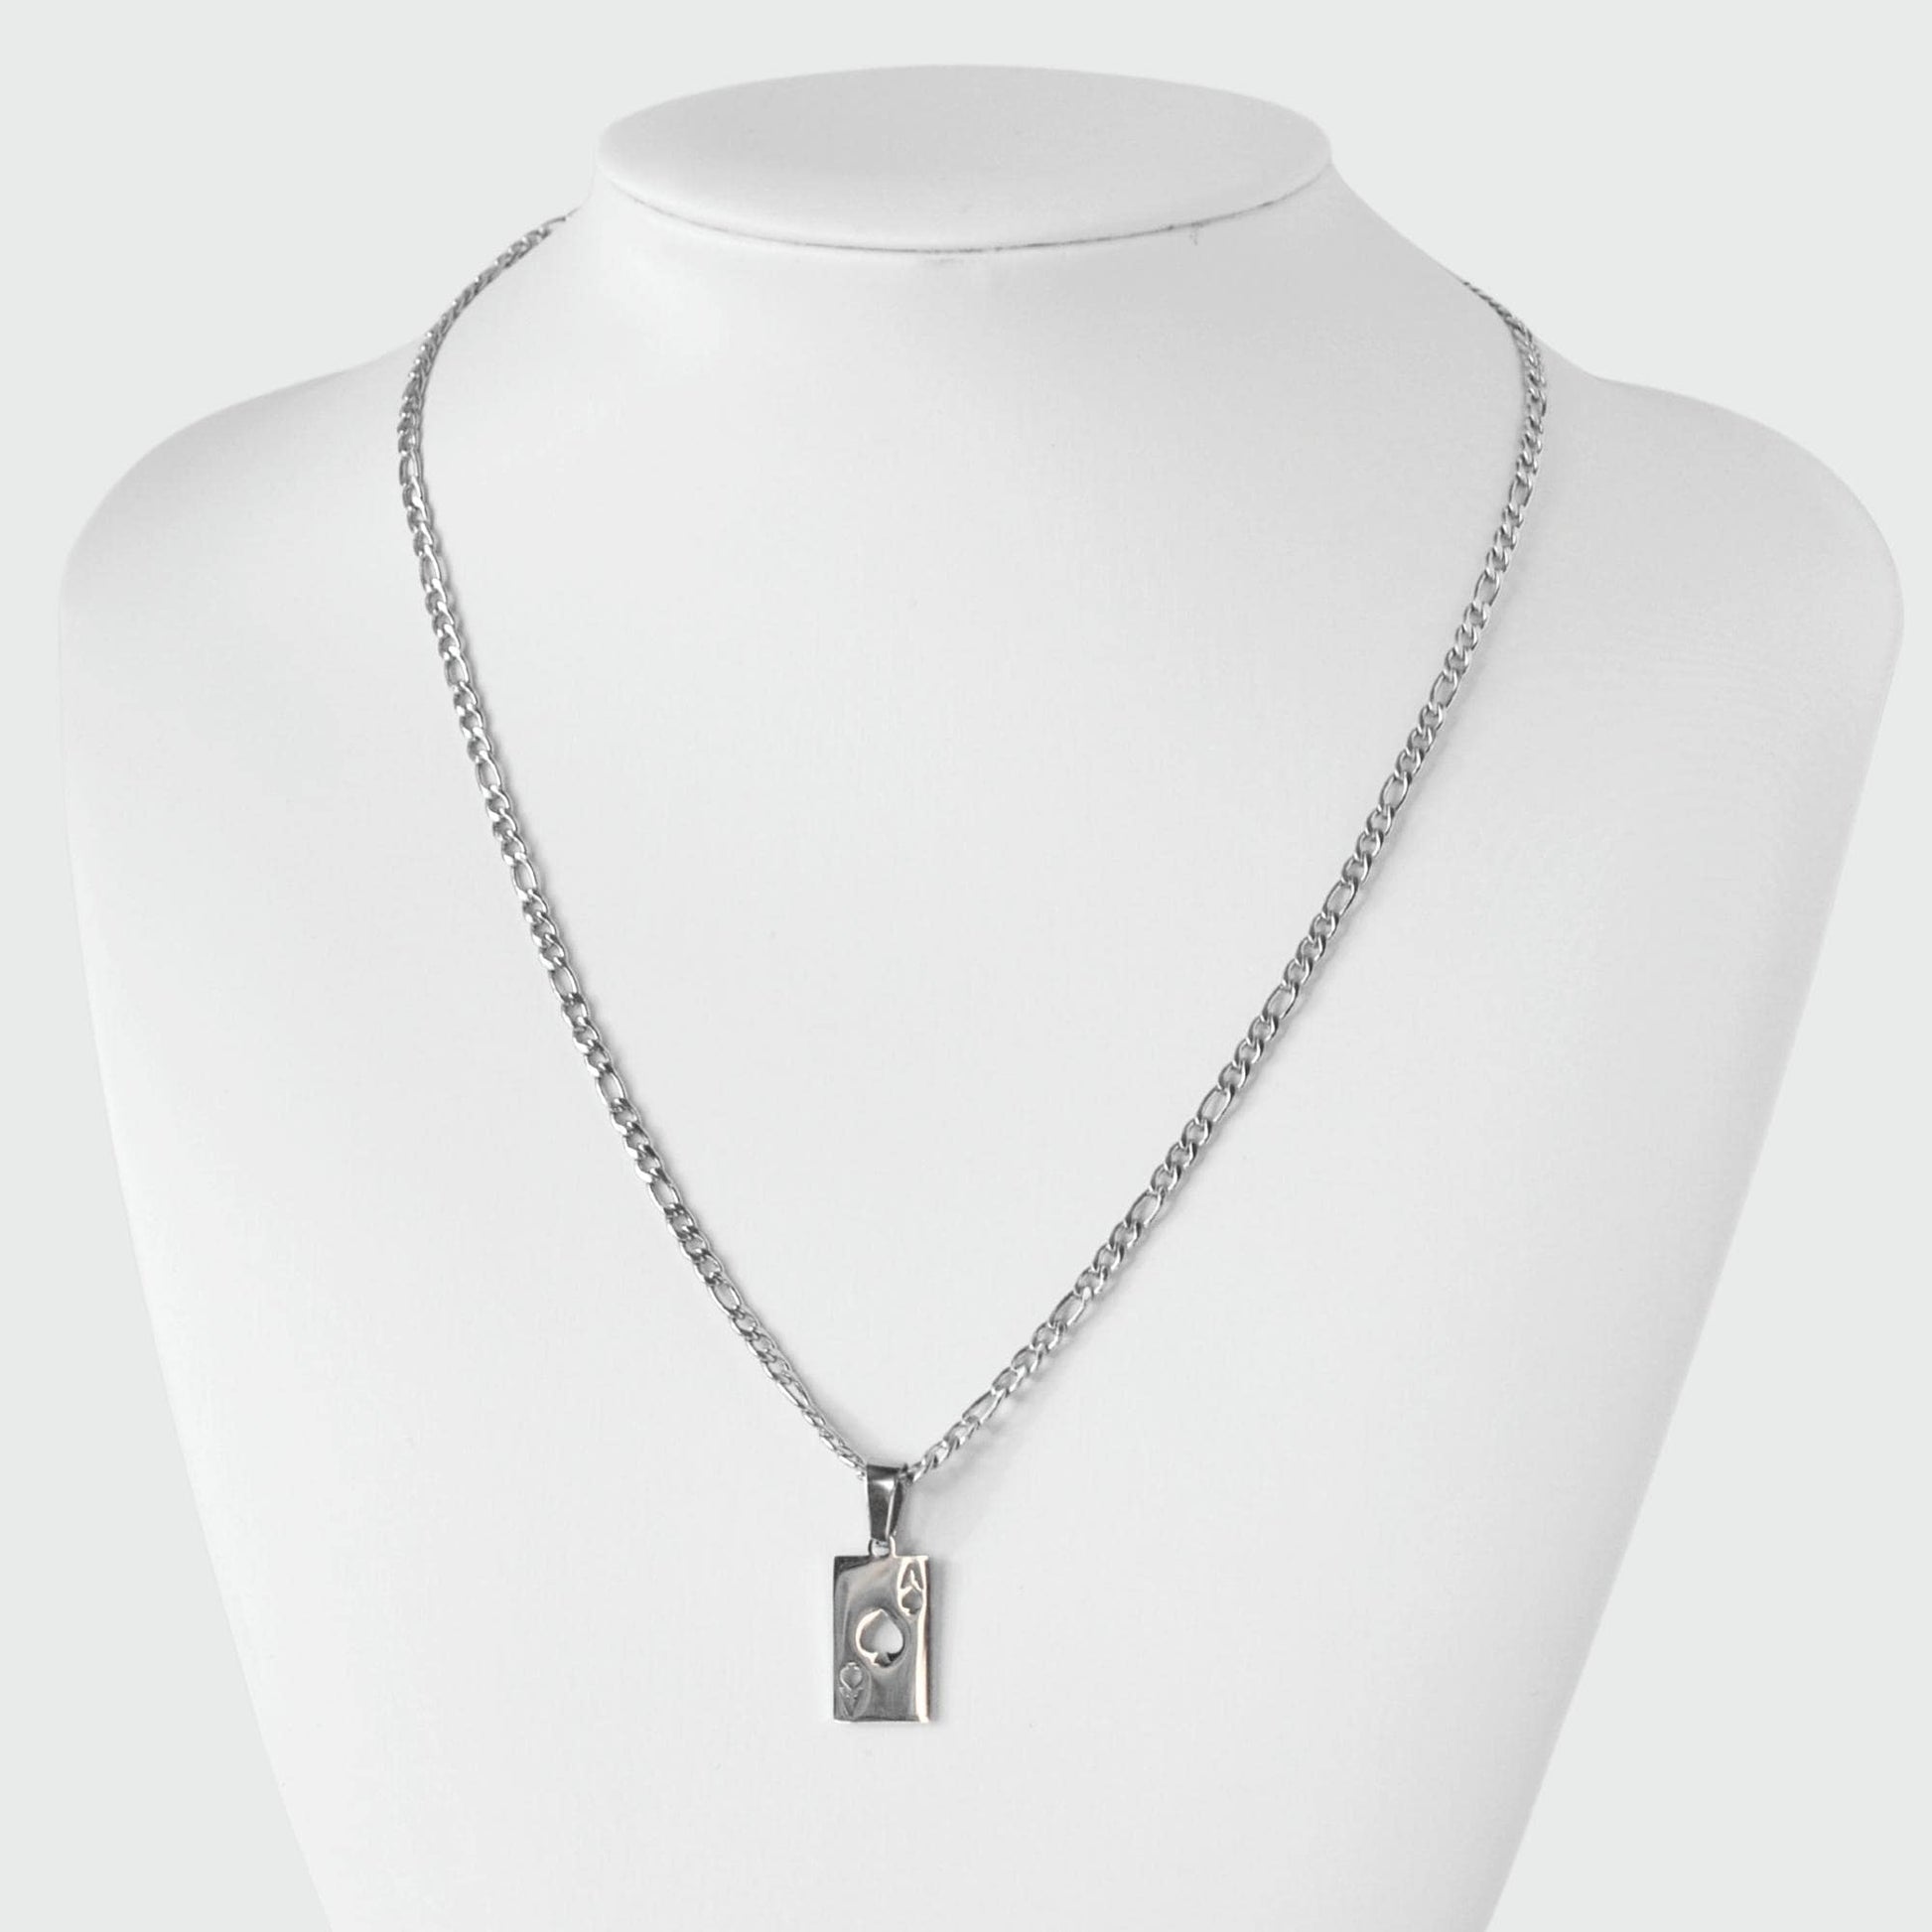 Silver Ace Of Spade Playing Card Pendant Necklace 3mm Figaro Chain For Men or Women - Necklace - Boutique Wear RENN